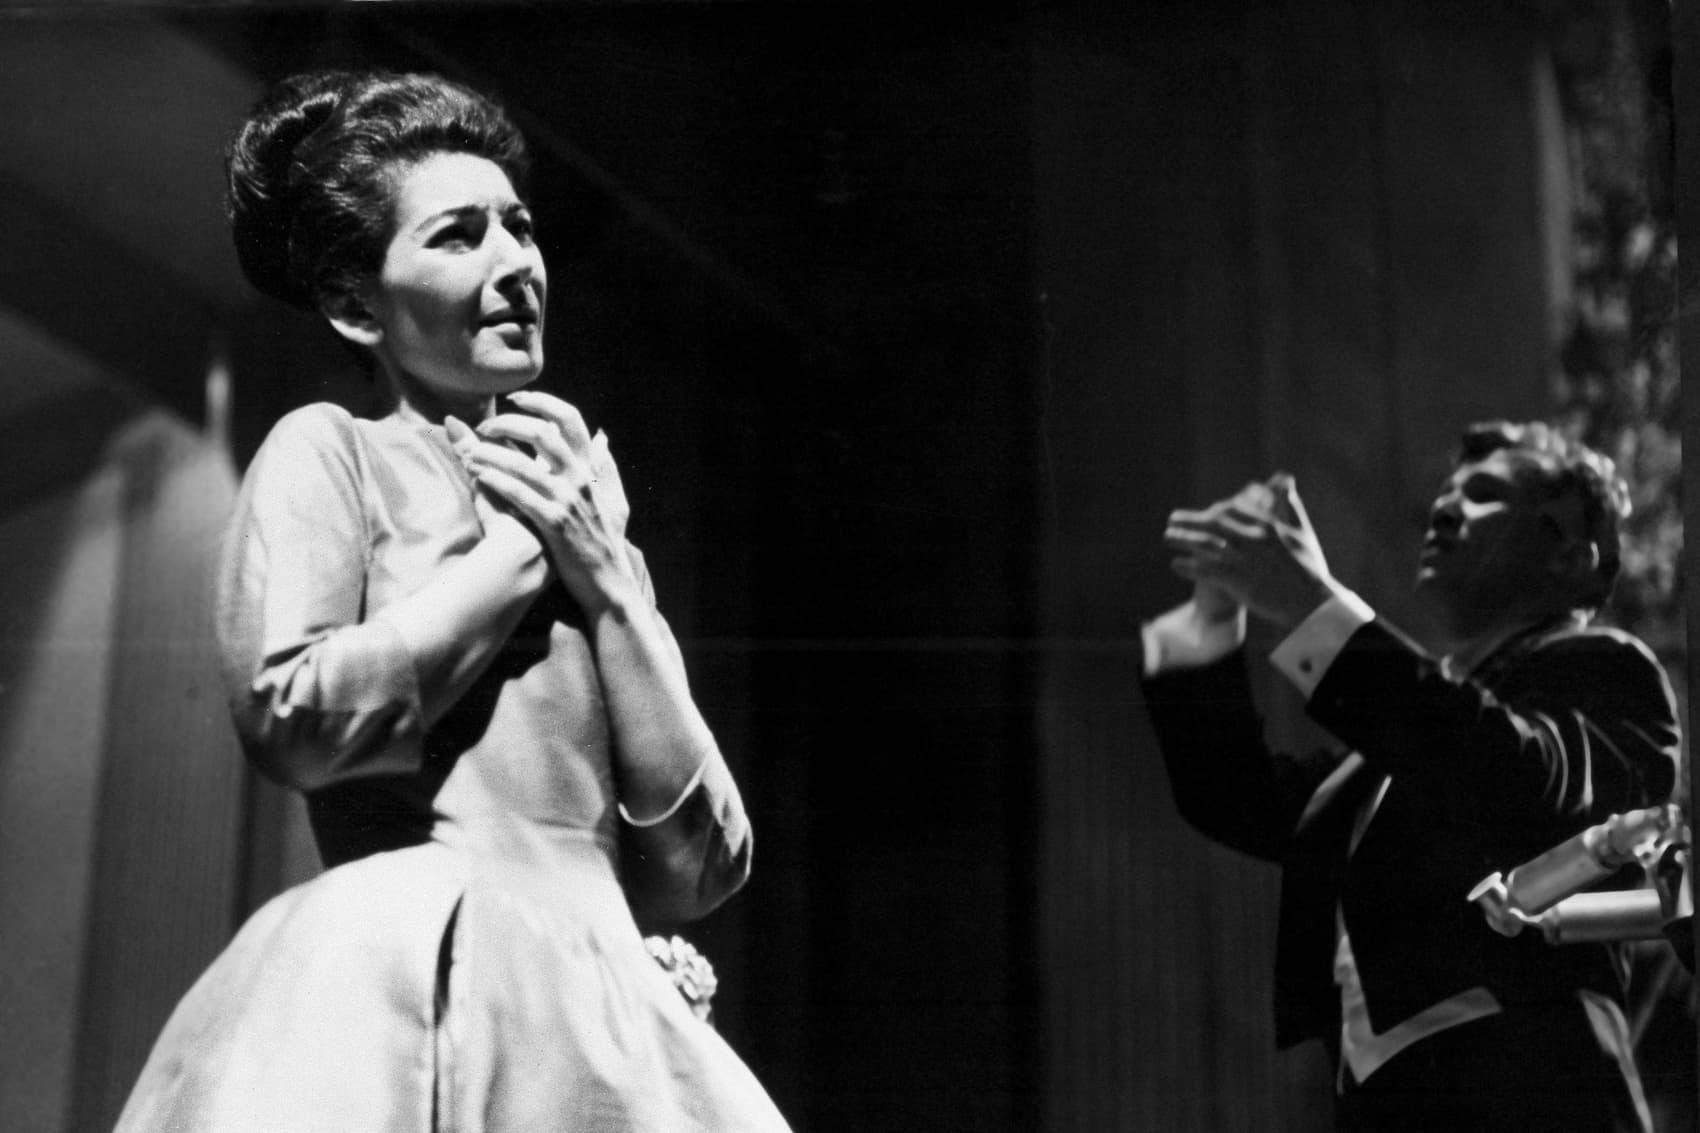 Soprano Maria Callas sings at the Theater de Champs Elysees in Paris, France, under the direction of Maestro Georges Pretre, June 5, 1963. (Jean-Jacques Levy/AP)